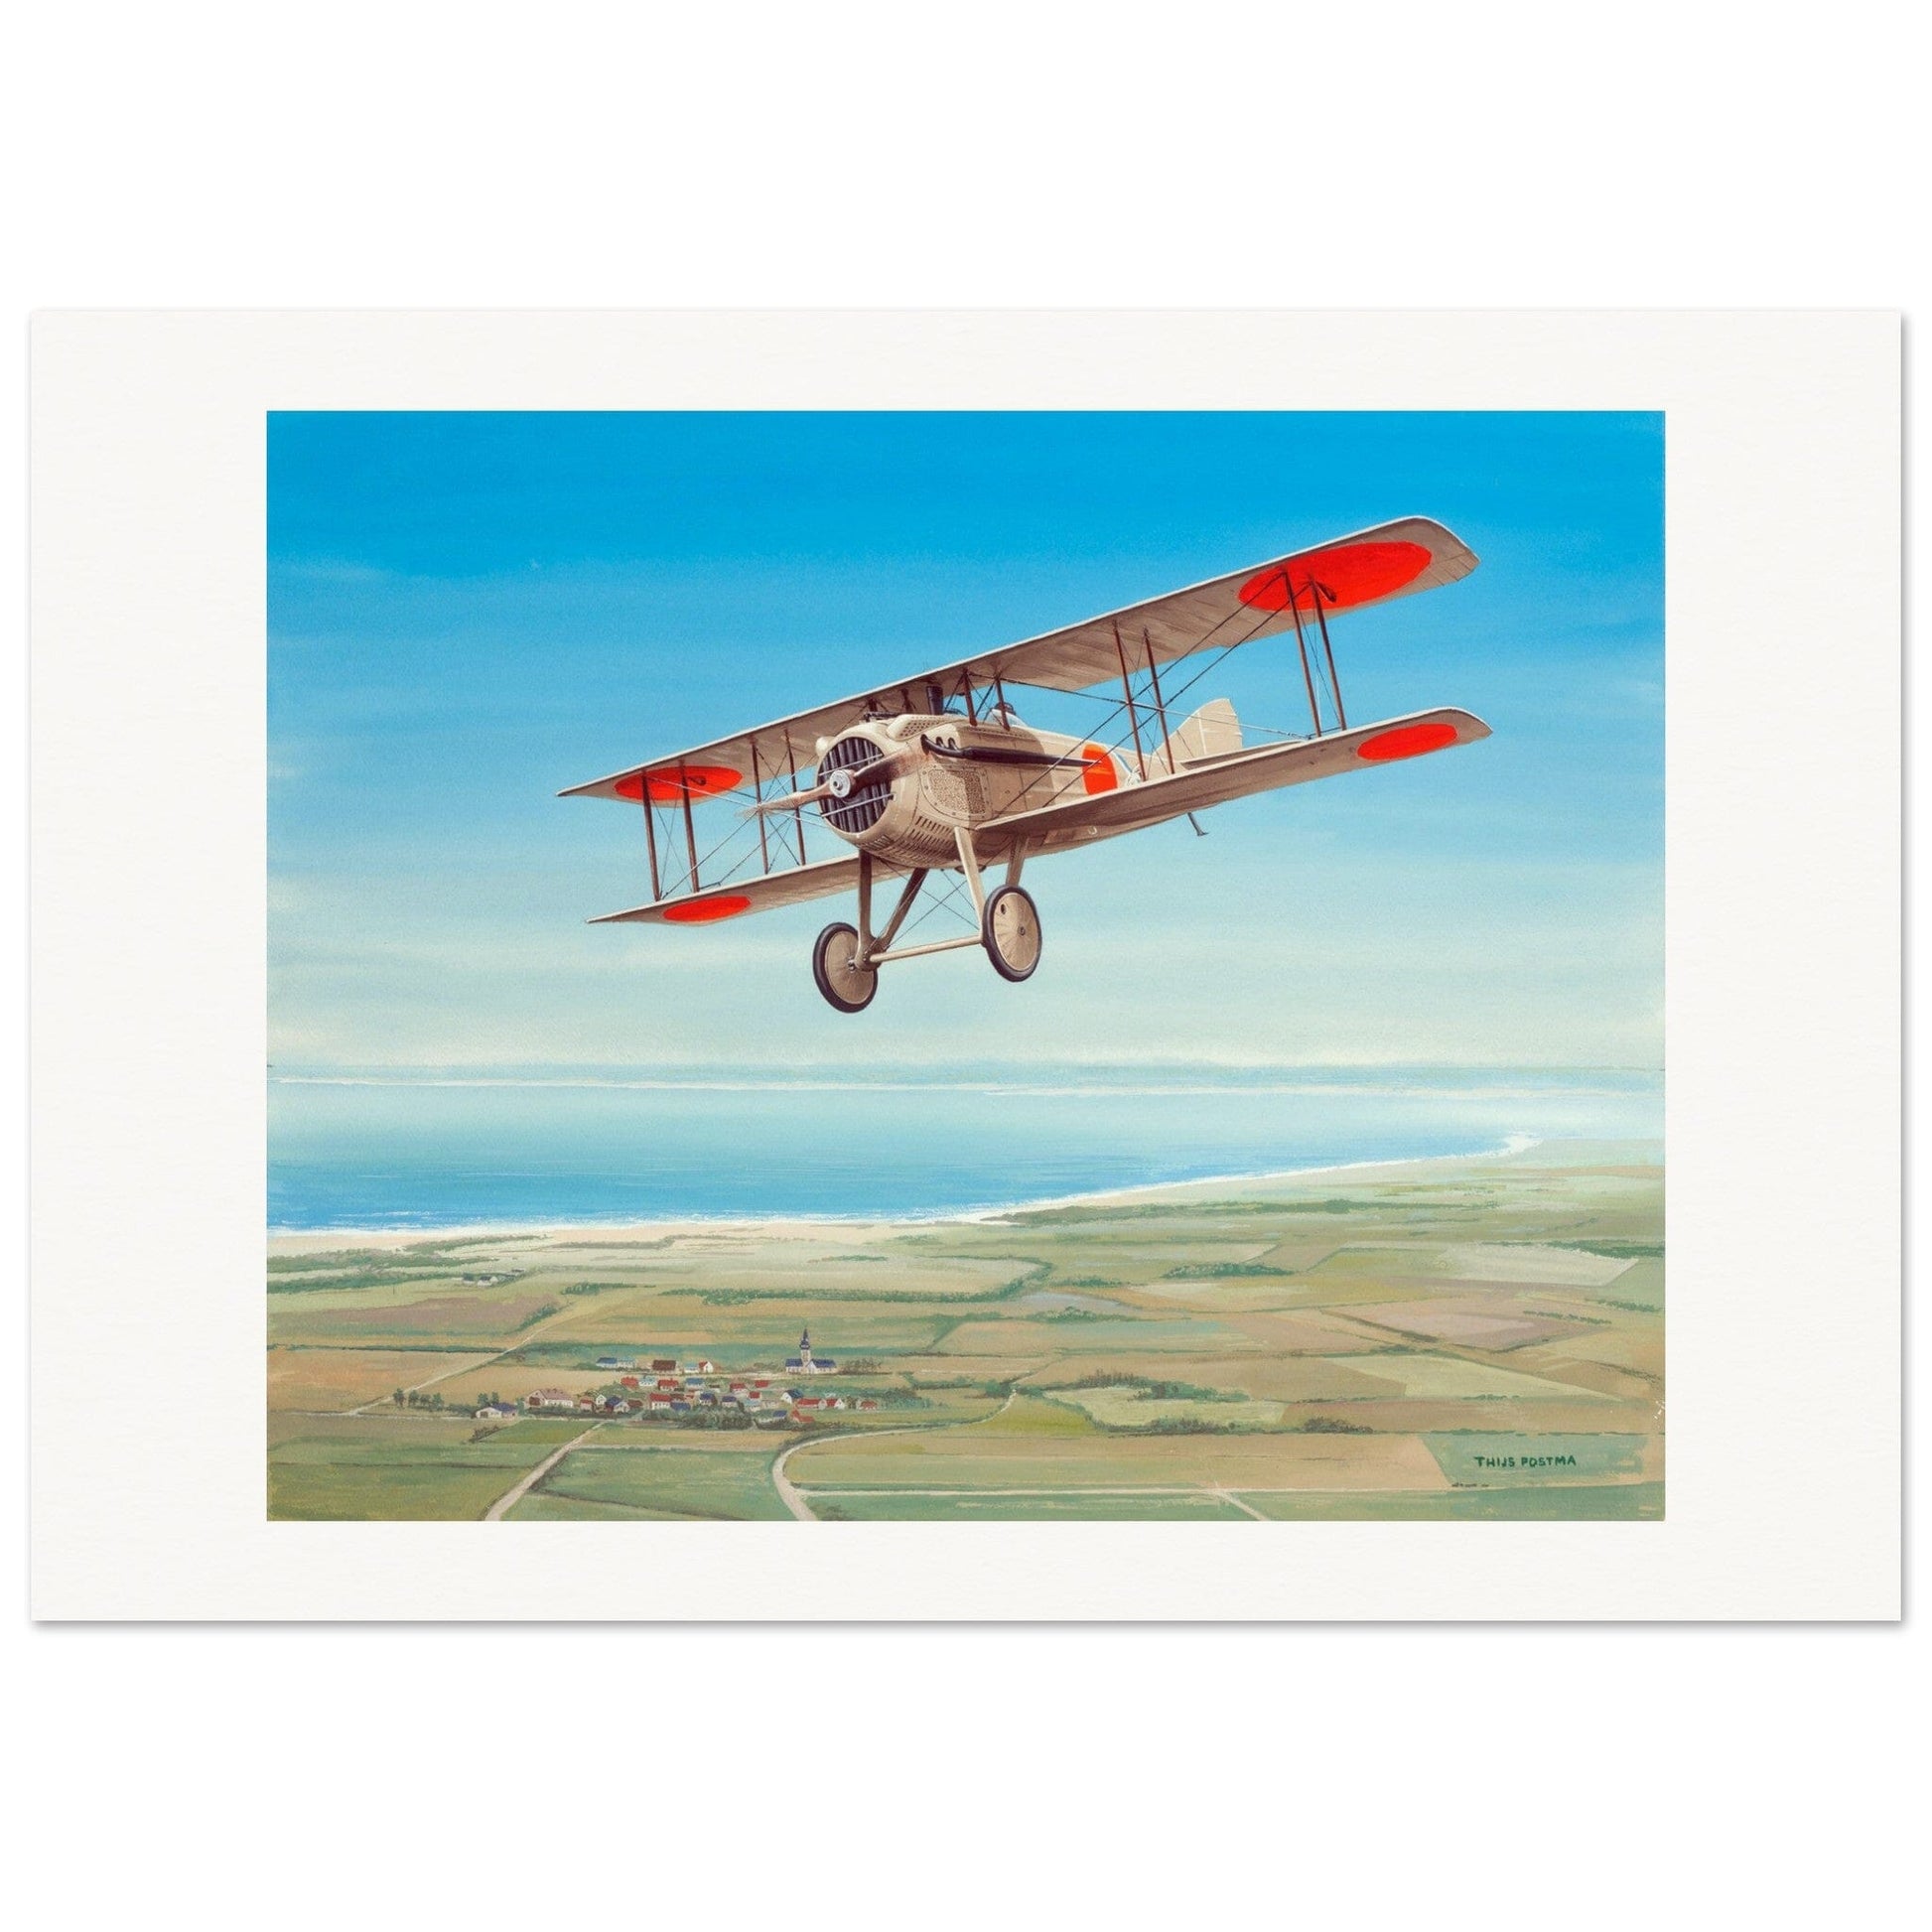 Thijs Postma - Poster - French Fighter SPAD S.VII Over Cadzand Poster Only TP Aviation Art 70x100 cm / 28x40″ 